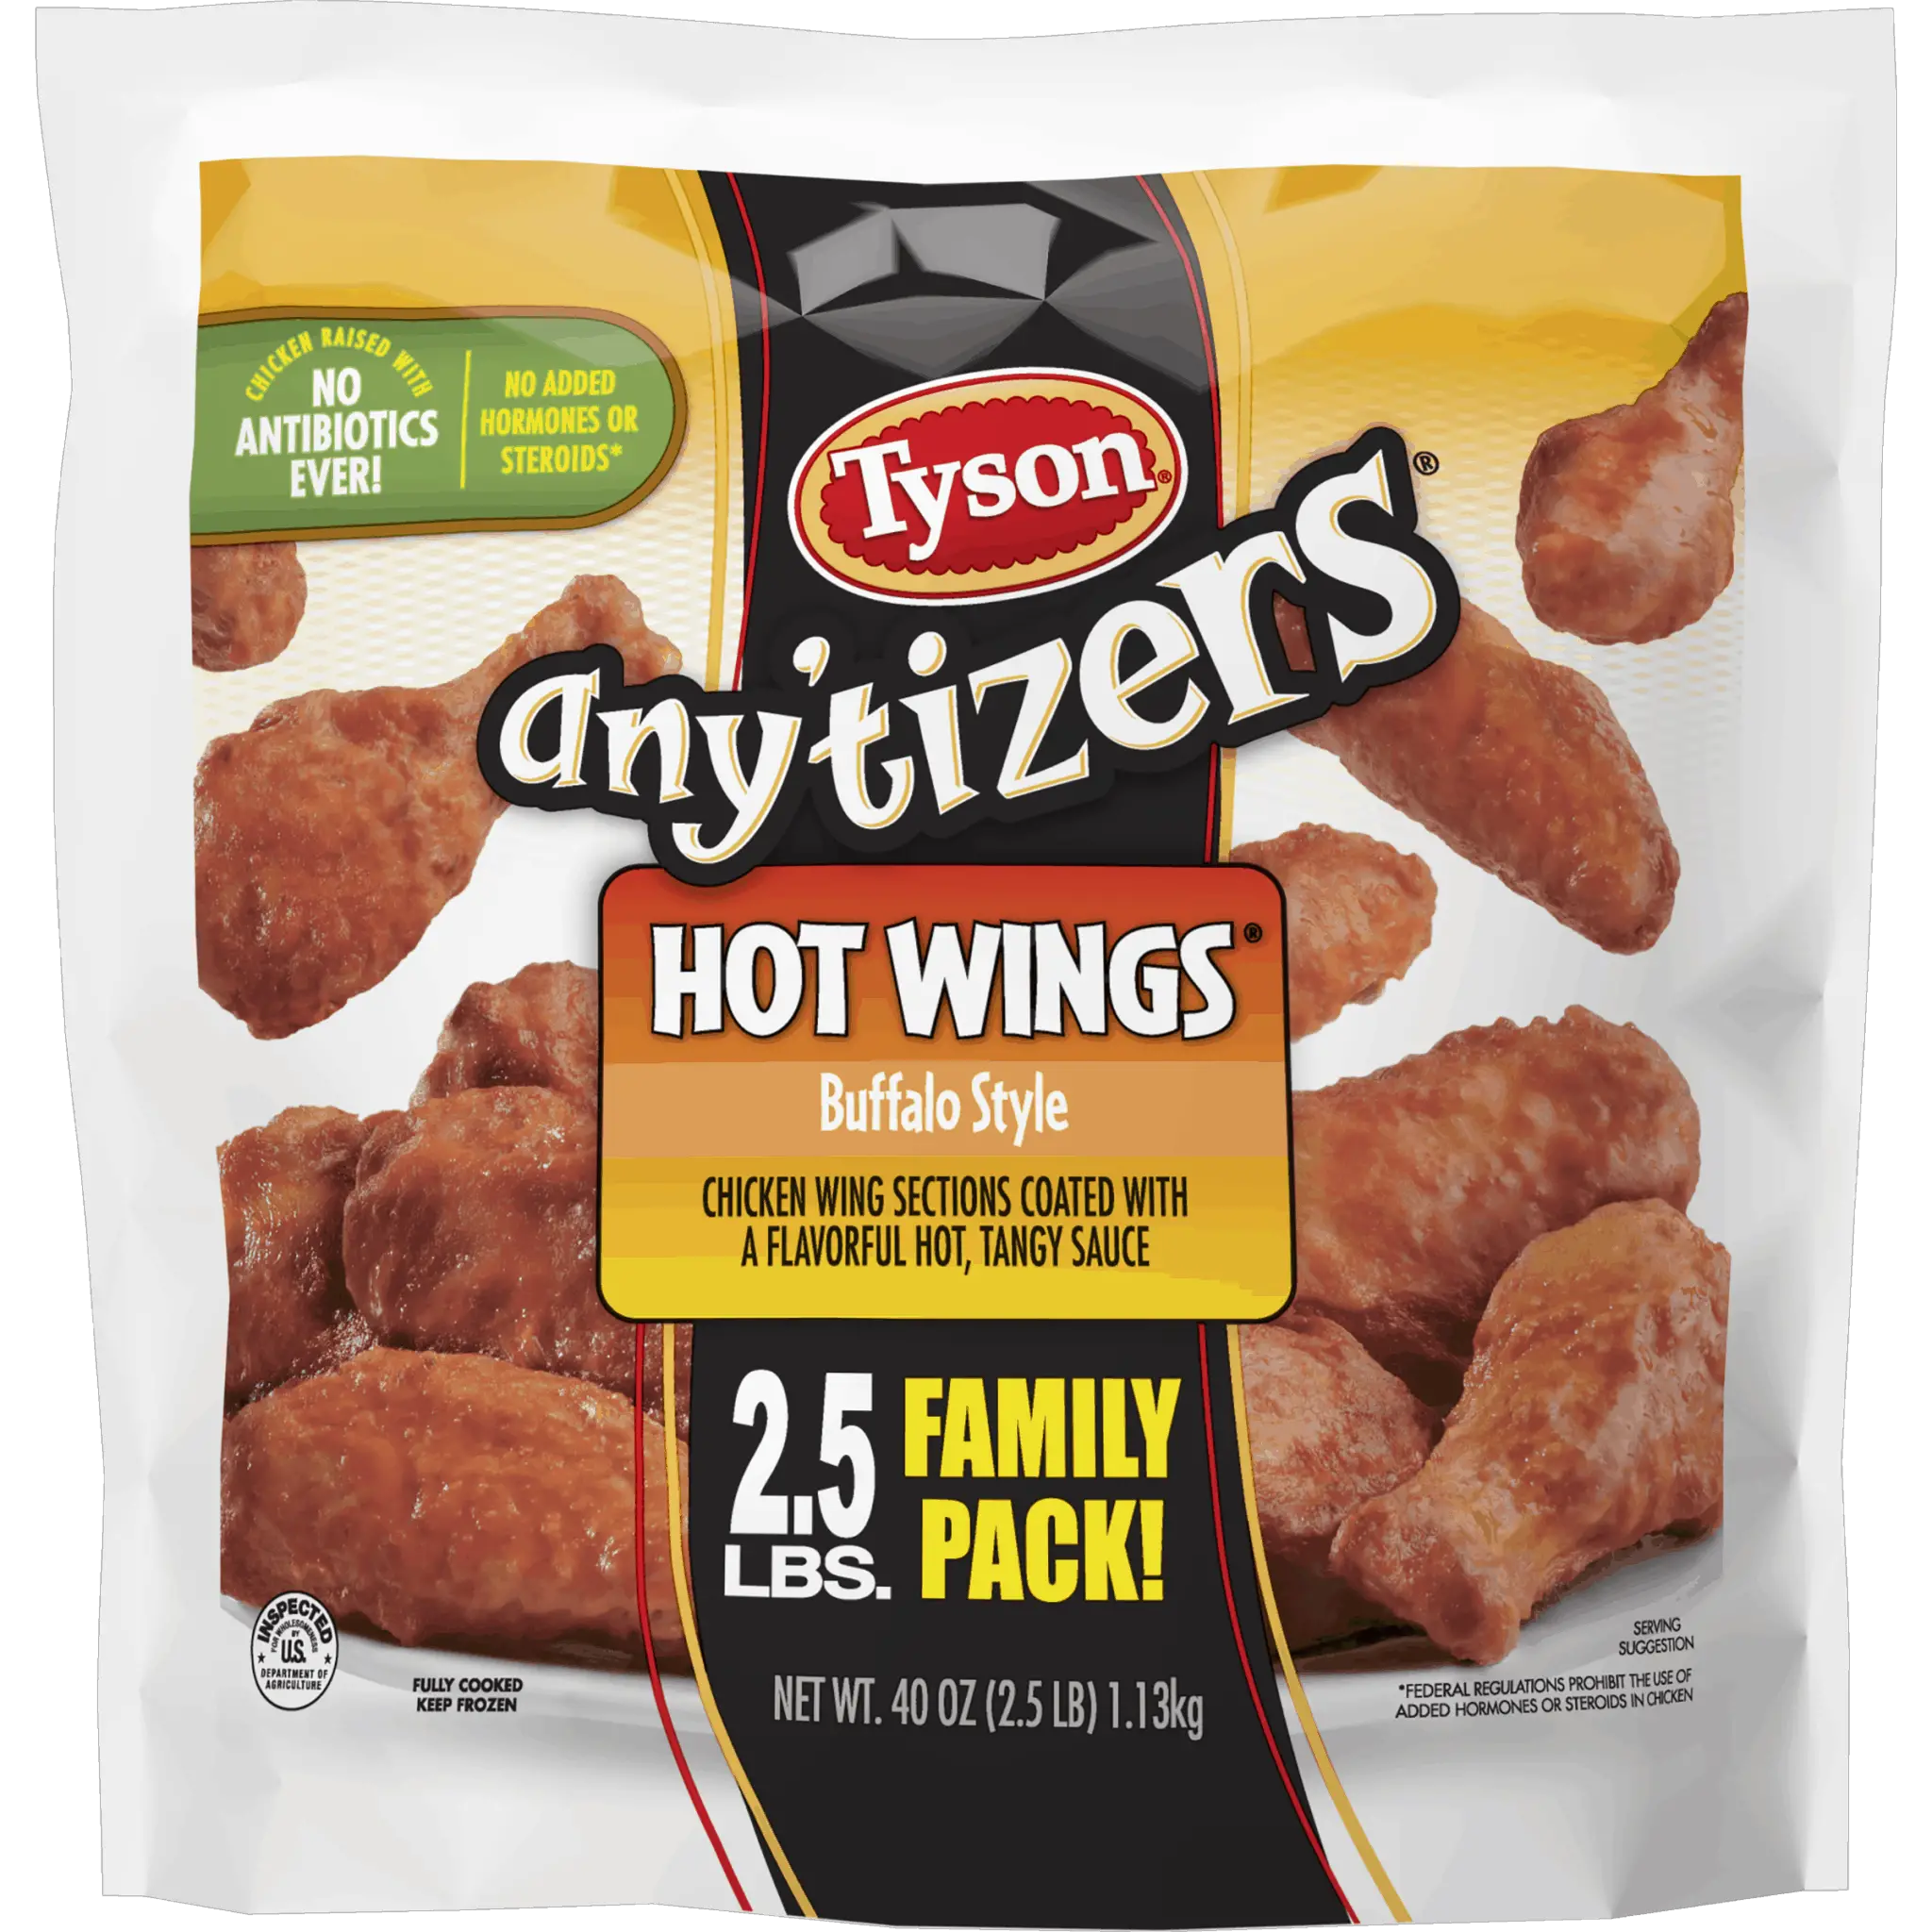 Air Fryer Chicken Hot Wings by Tyson Dairy